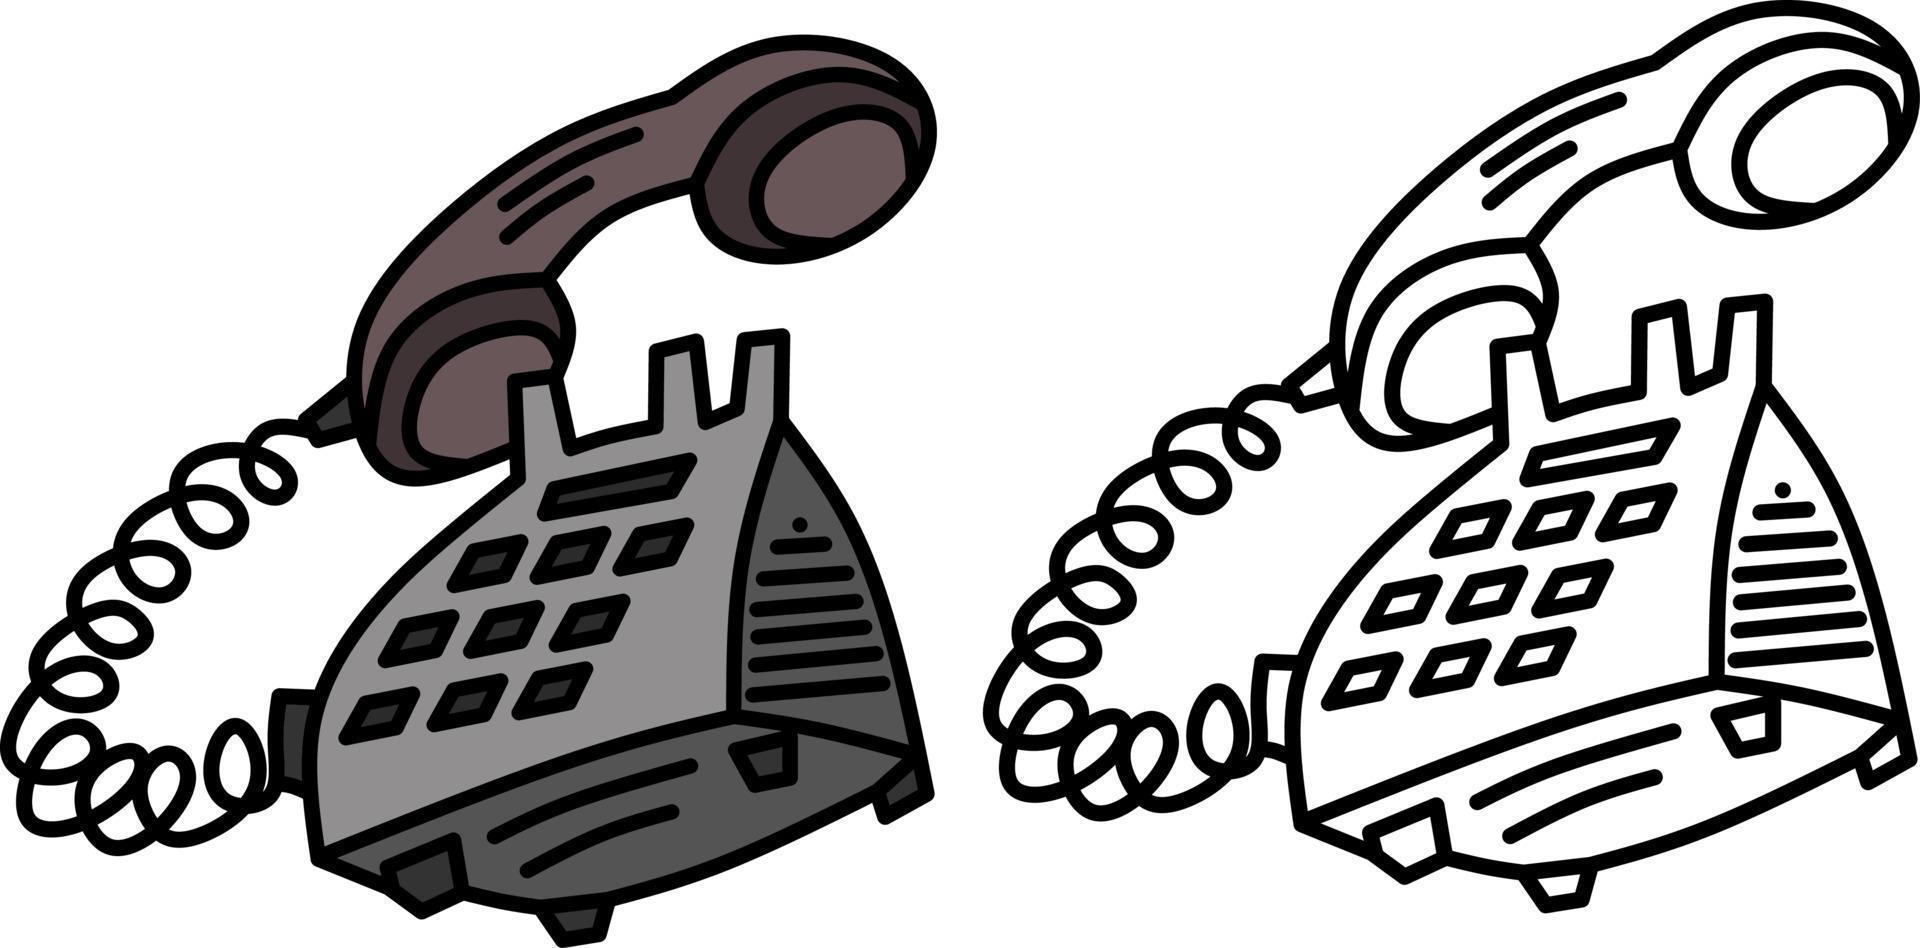 old phone vector image for coloring book